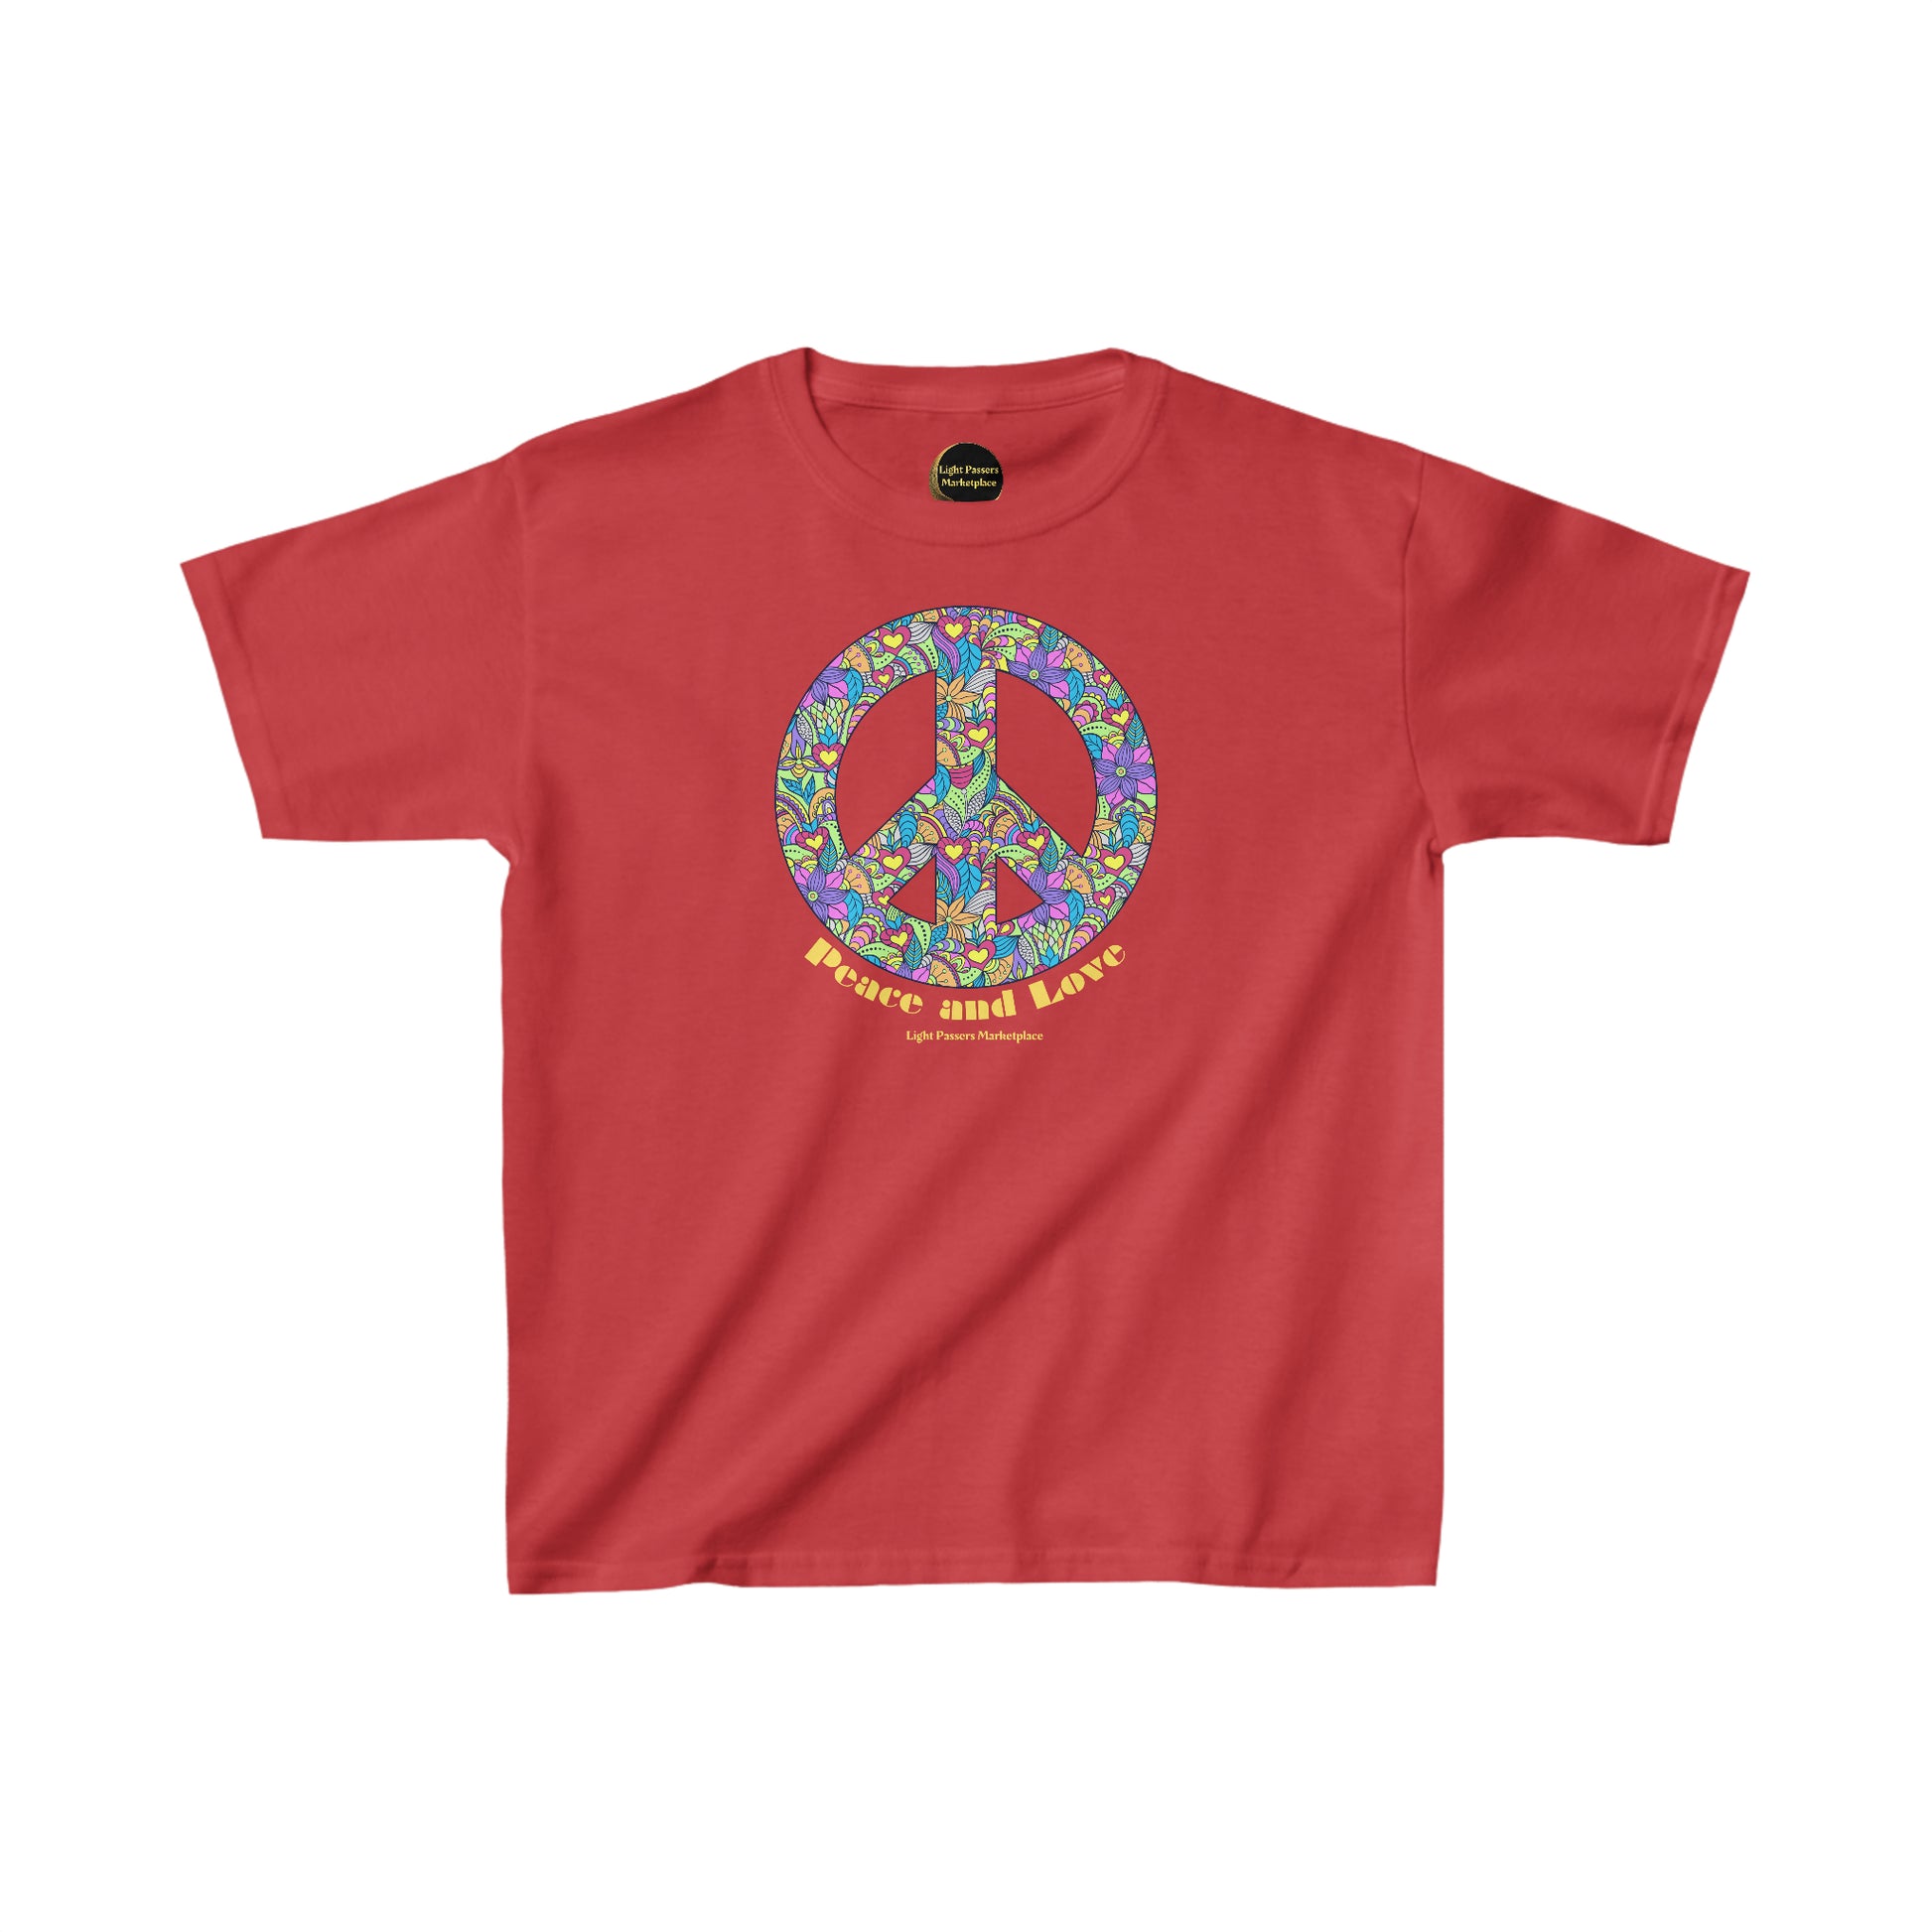 A red youth t-shirt featuring a peace sign adorned with flowers and hearts. Made of 100% cotton with twill tape shoulders for durability and a curl-resistant collar. Ethically sourced materials.